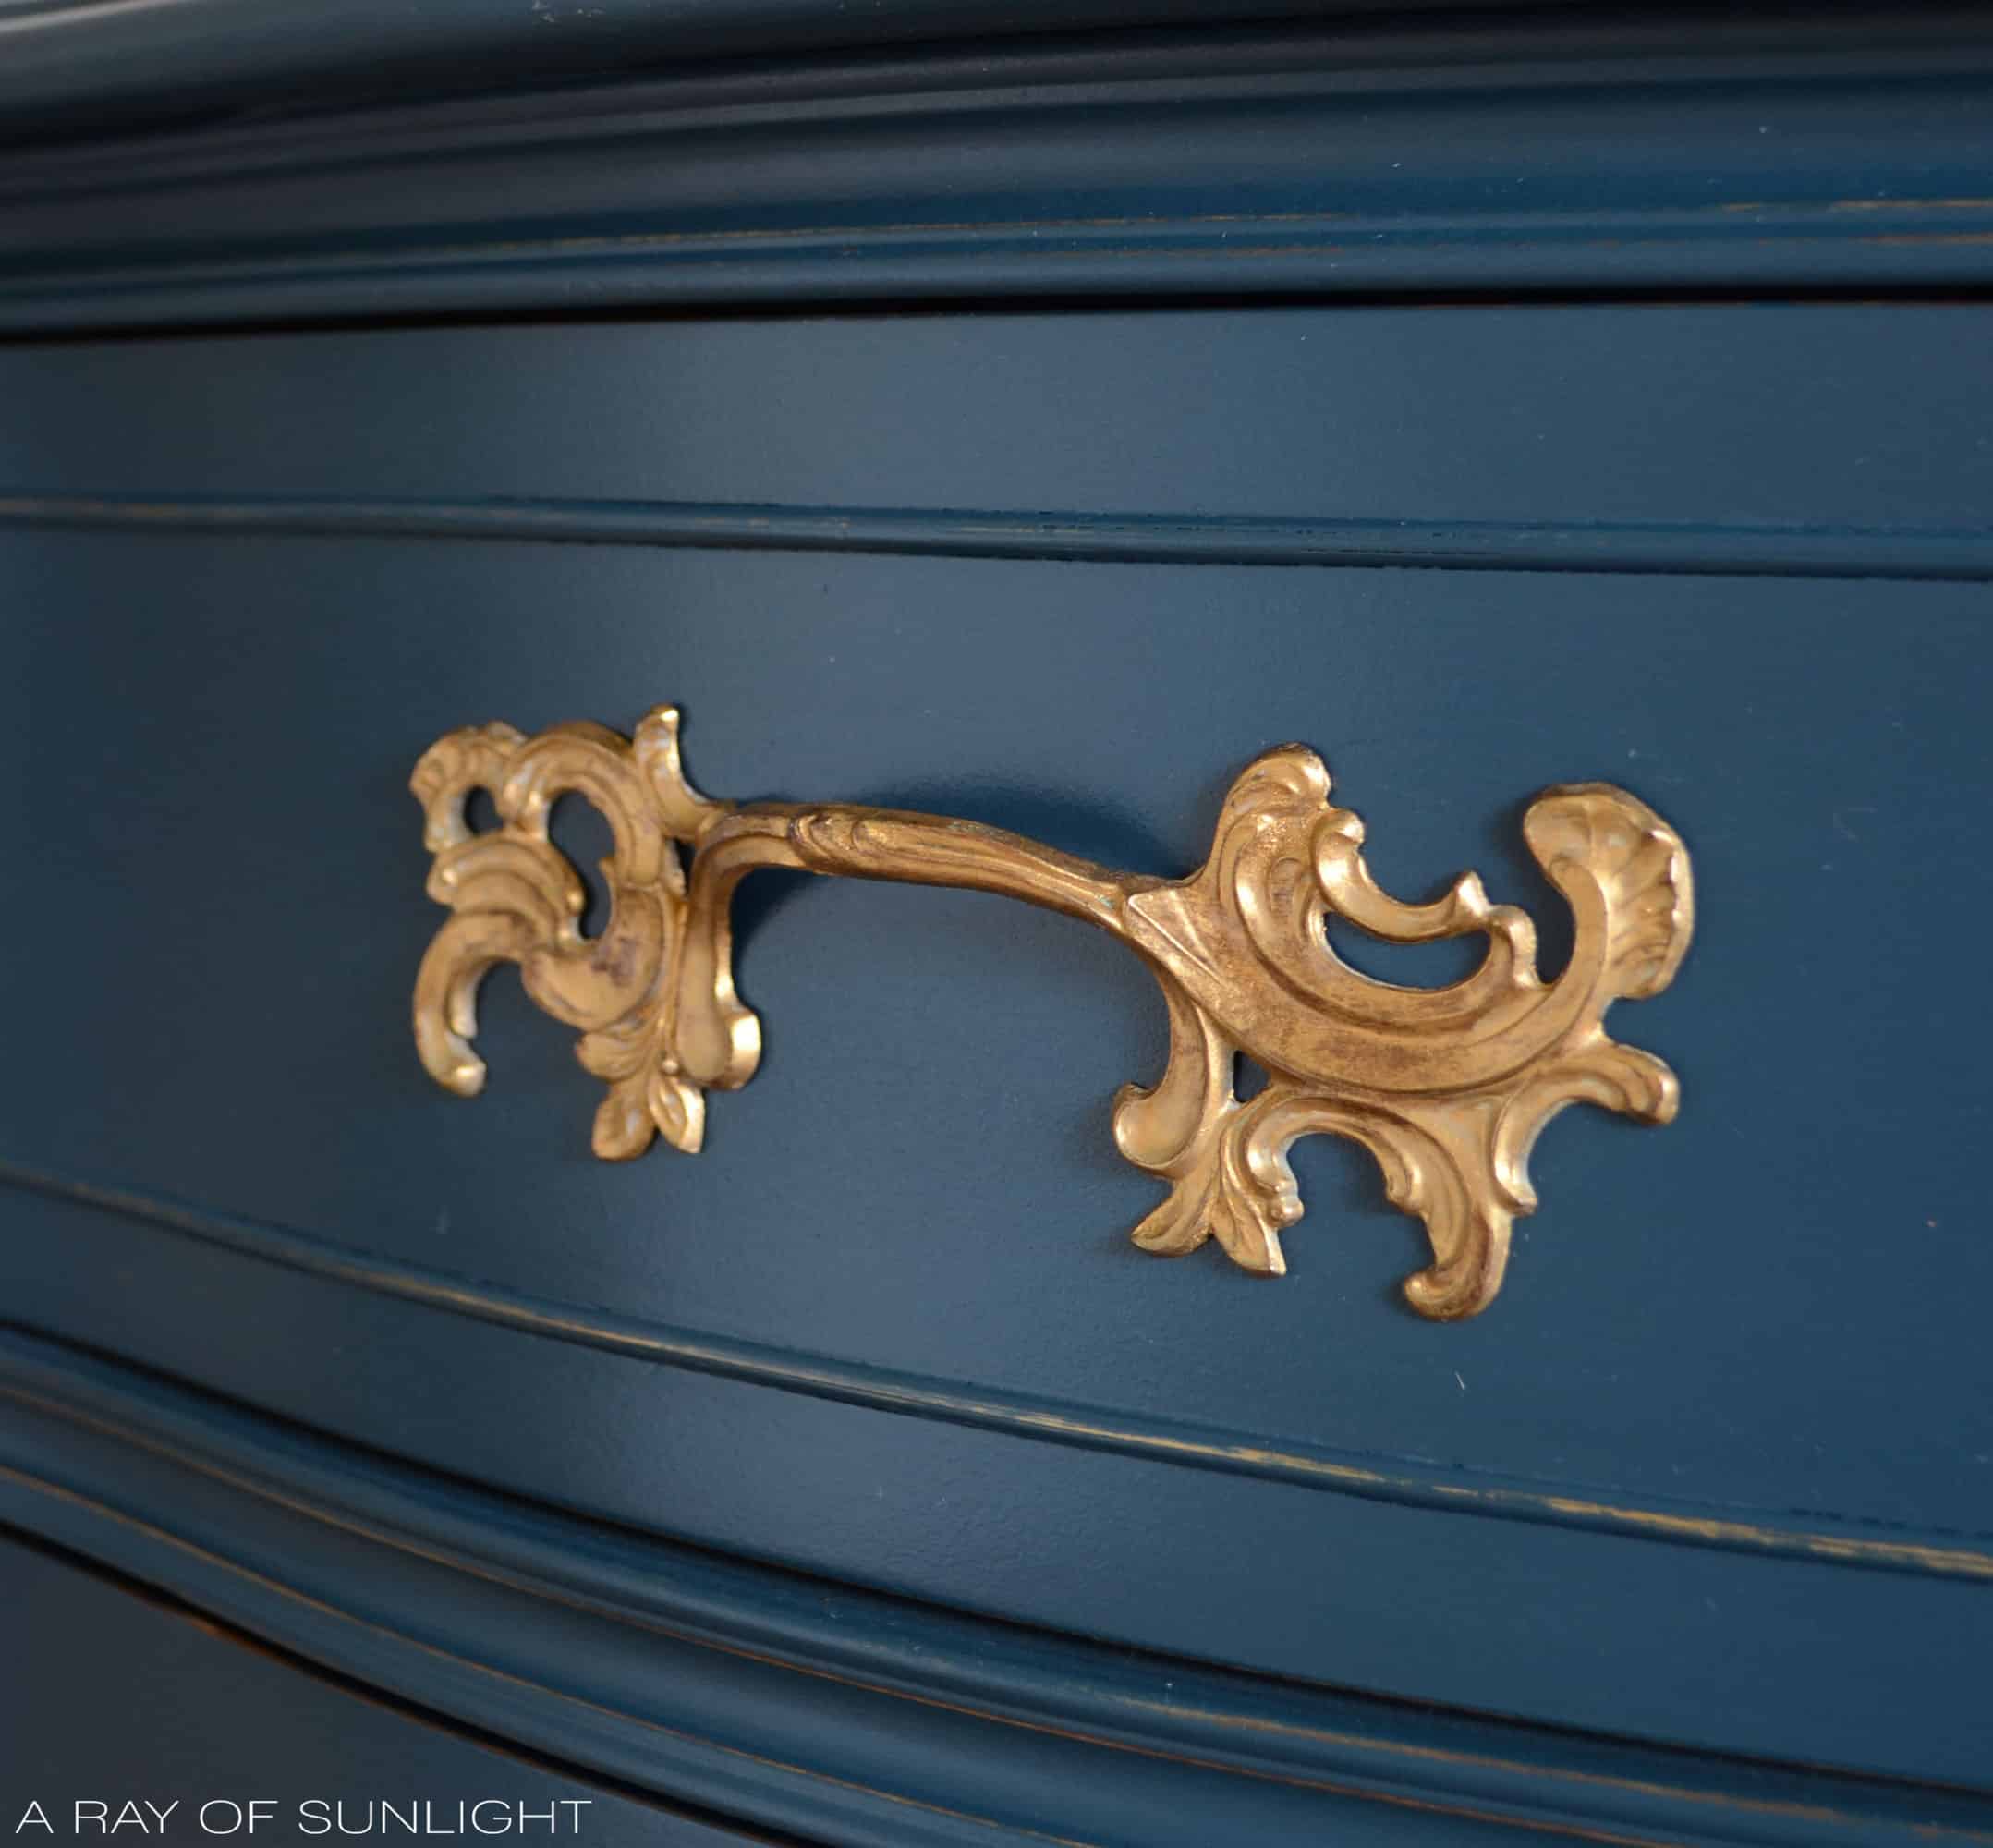 closeup of the french provincial hardware with rub n buff finish